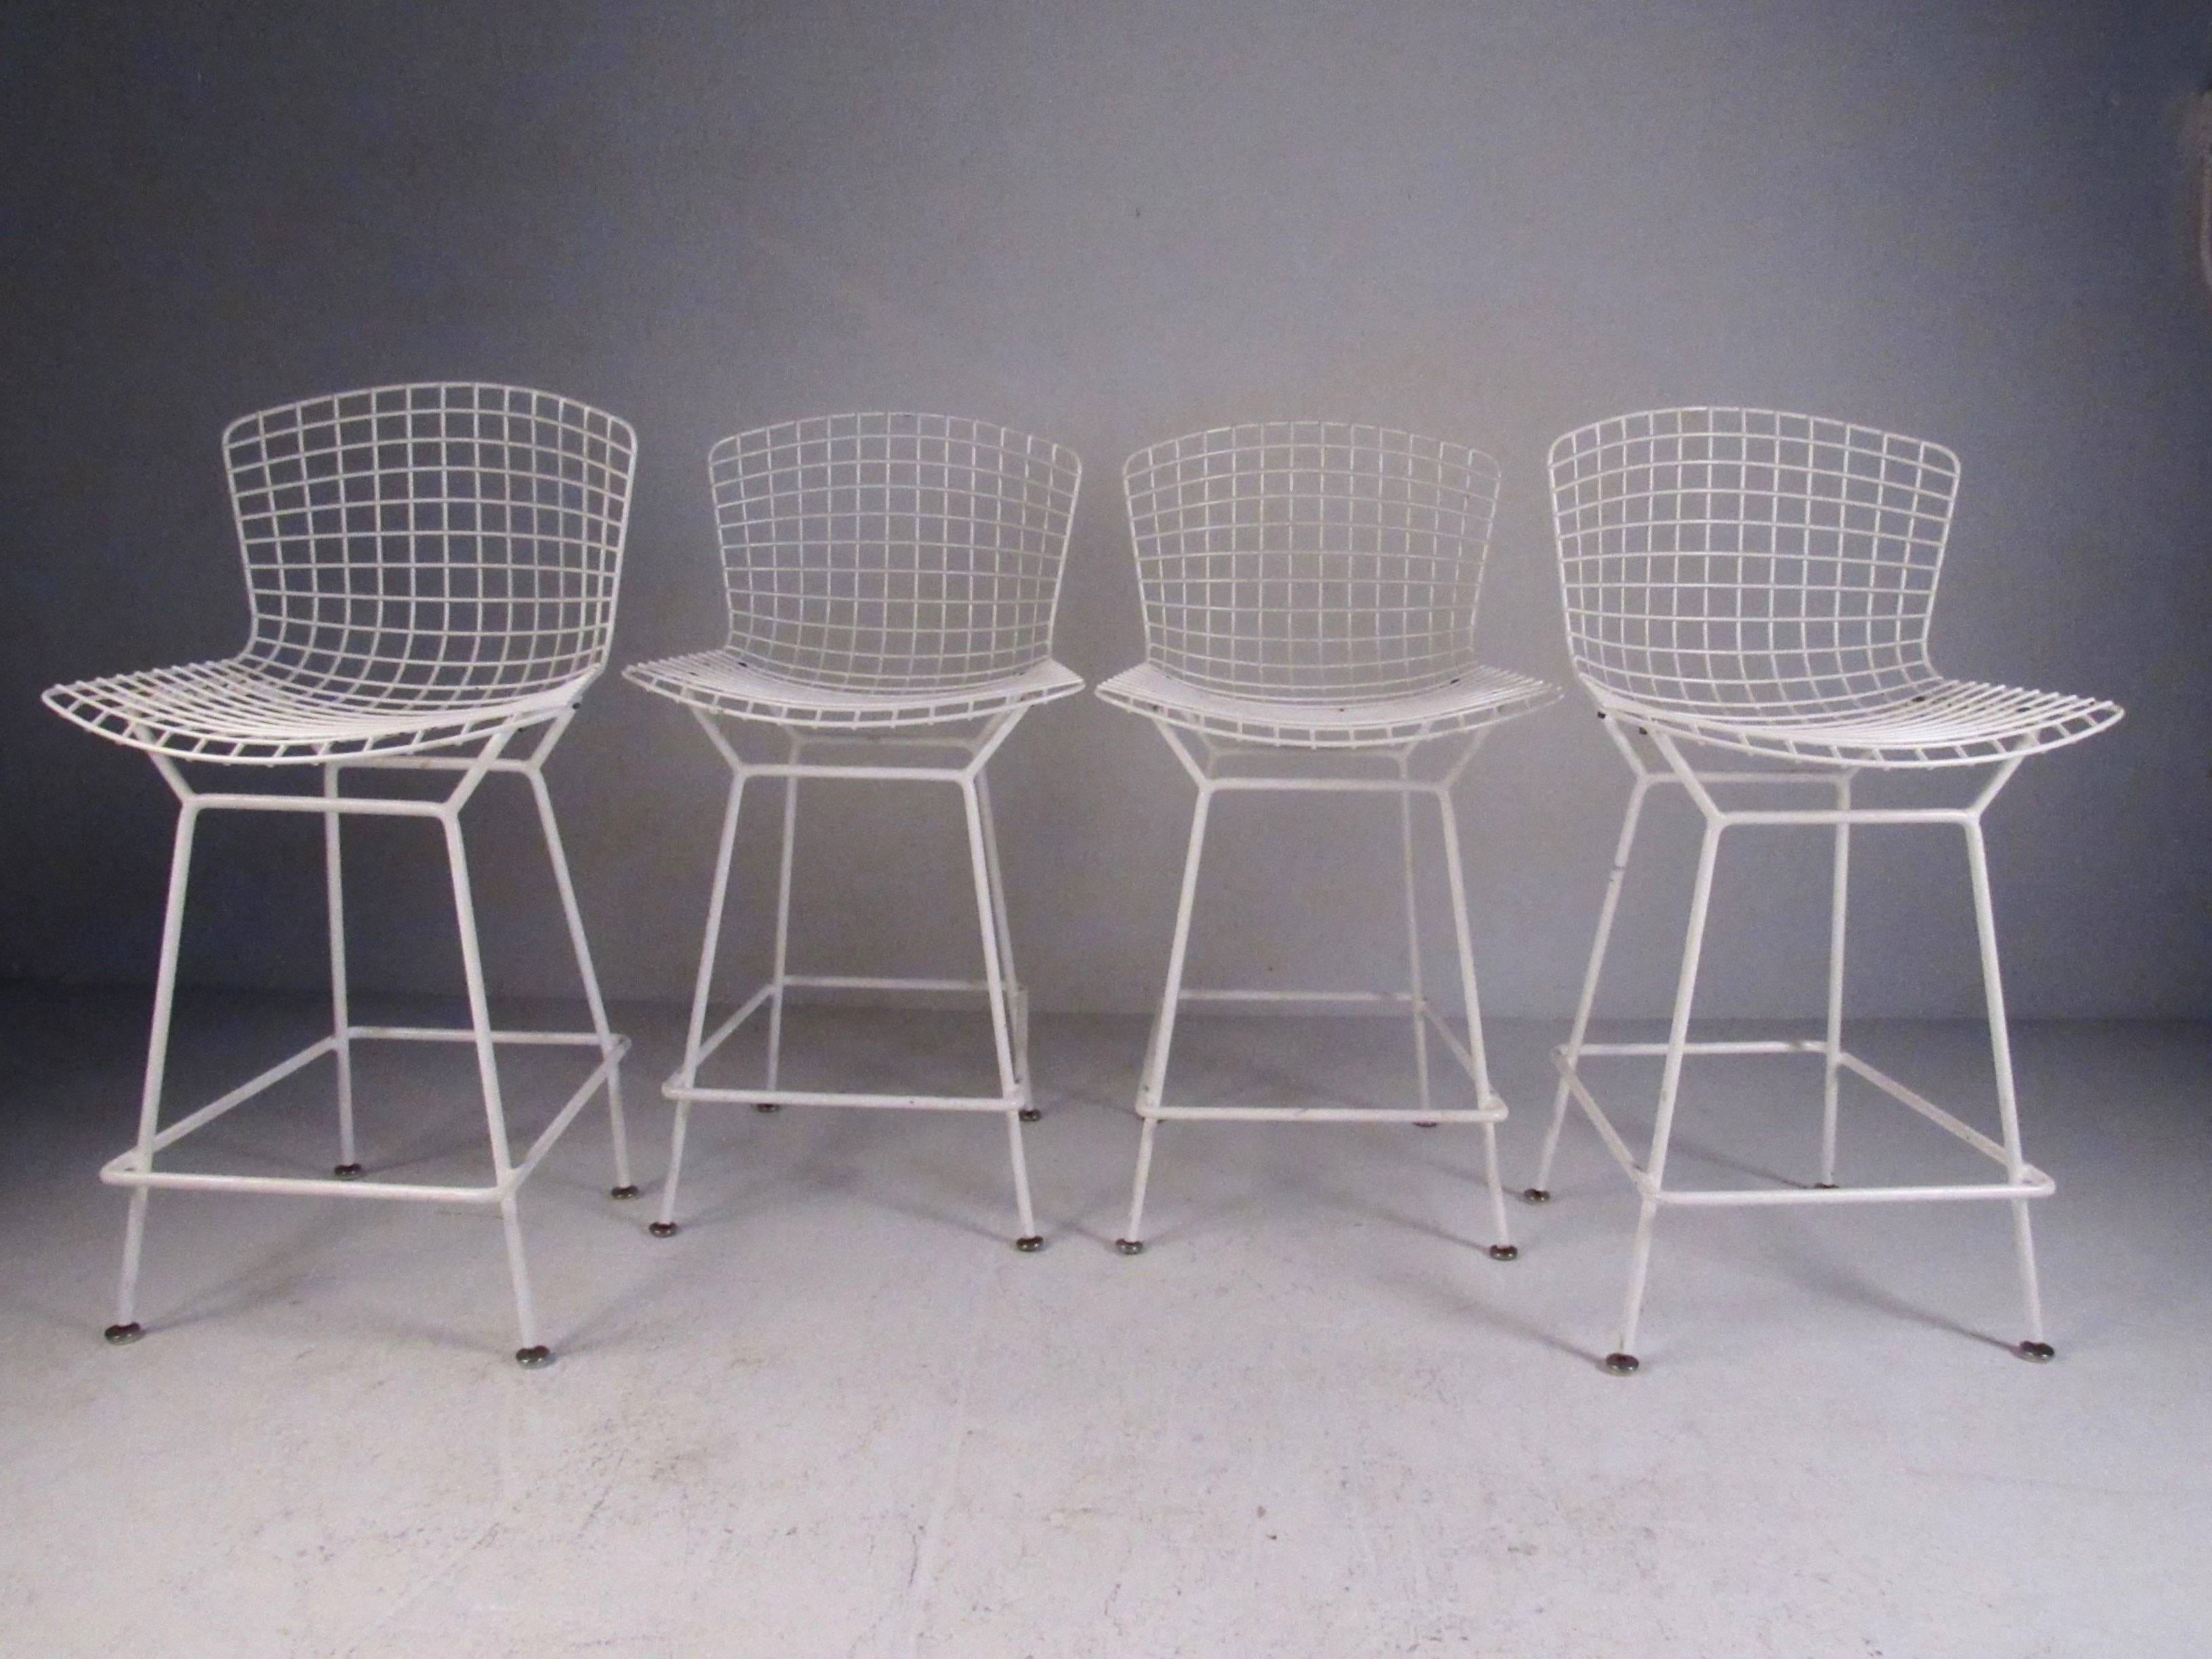 This stylish set of four Mid-Century bar stools as designed by Harry Bertoia for Knoll International, circa 1970s. Stunning modern design includes sculpted wire seat and sturdy footrest. Please confirm item location (NY or NJ).